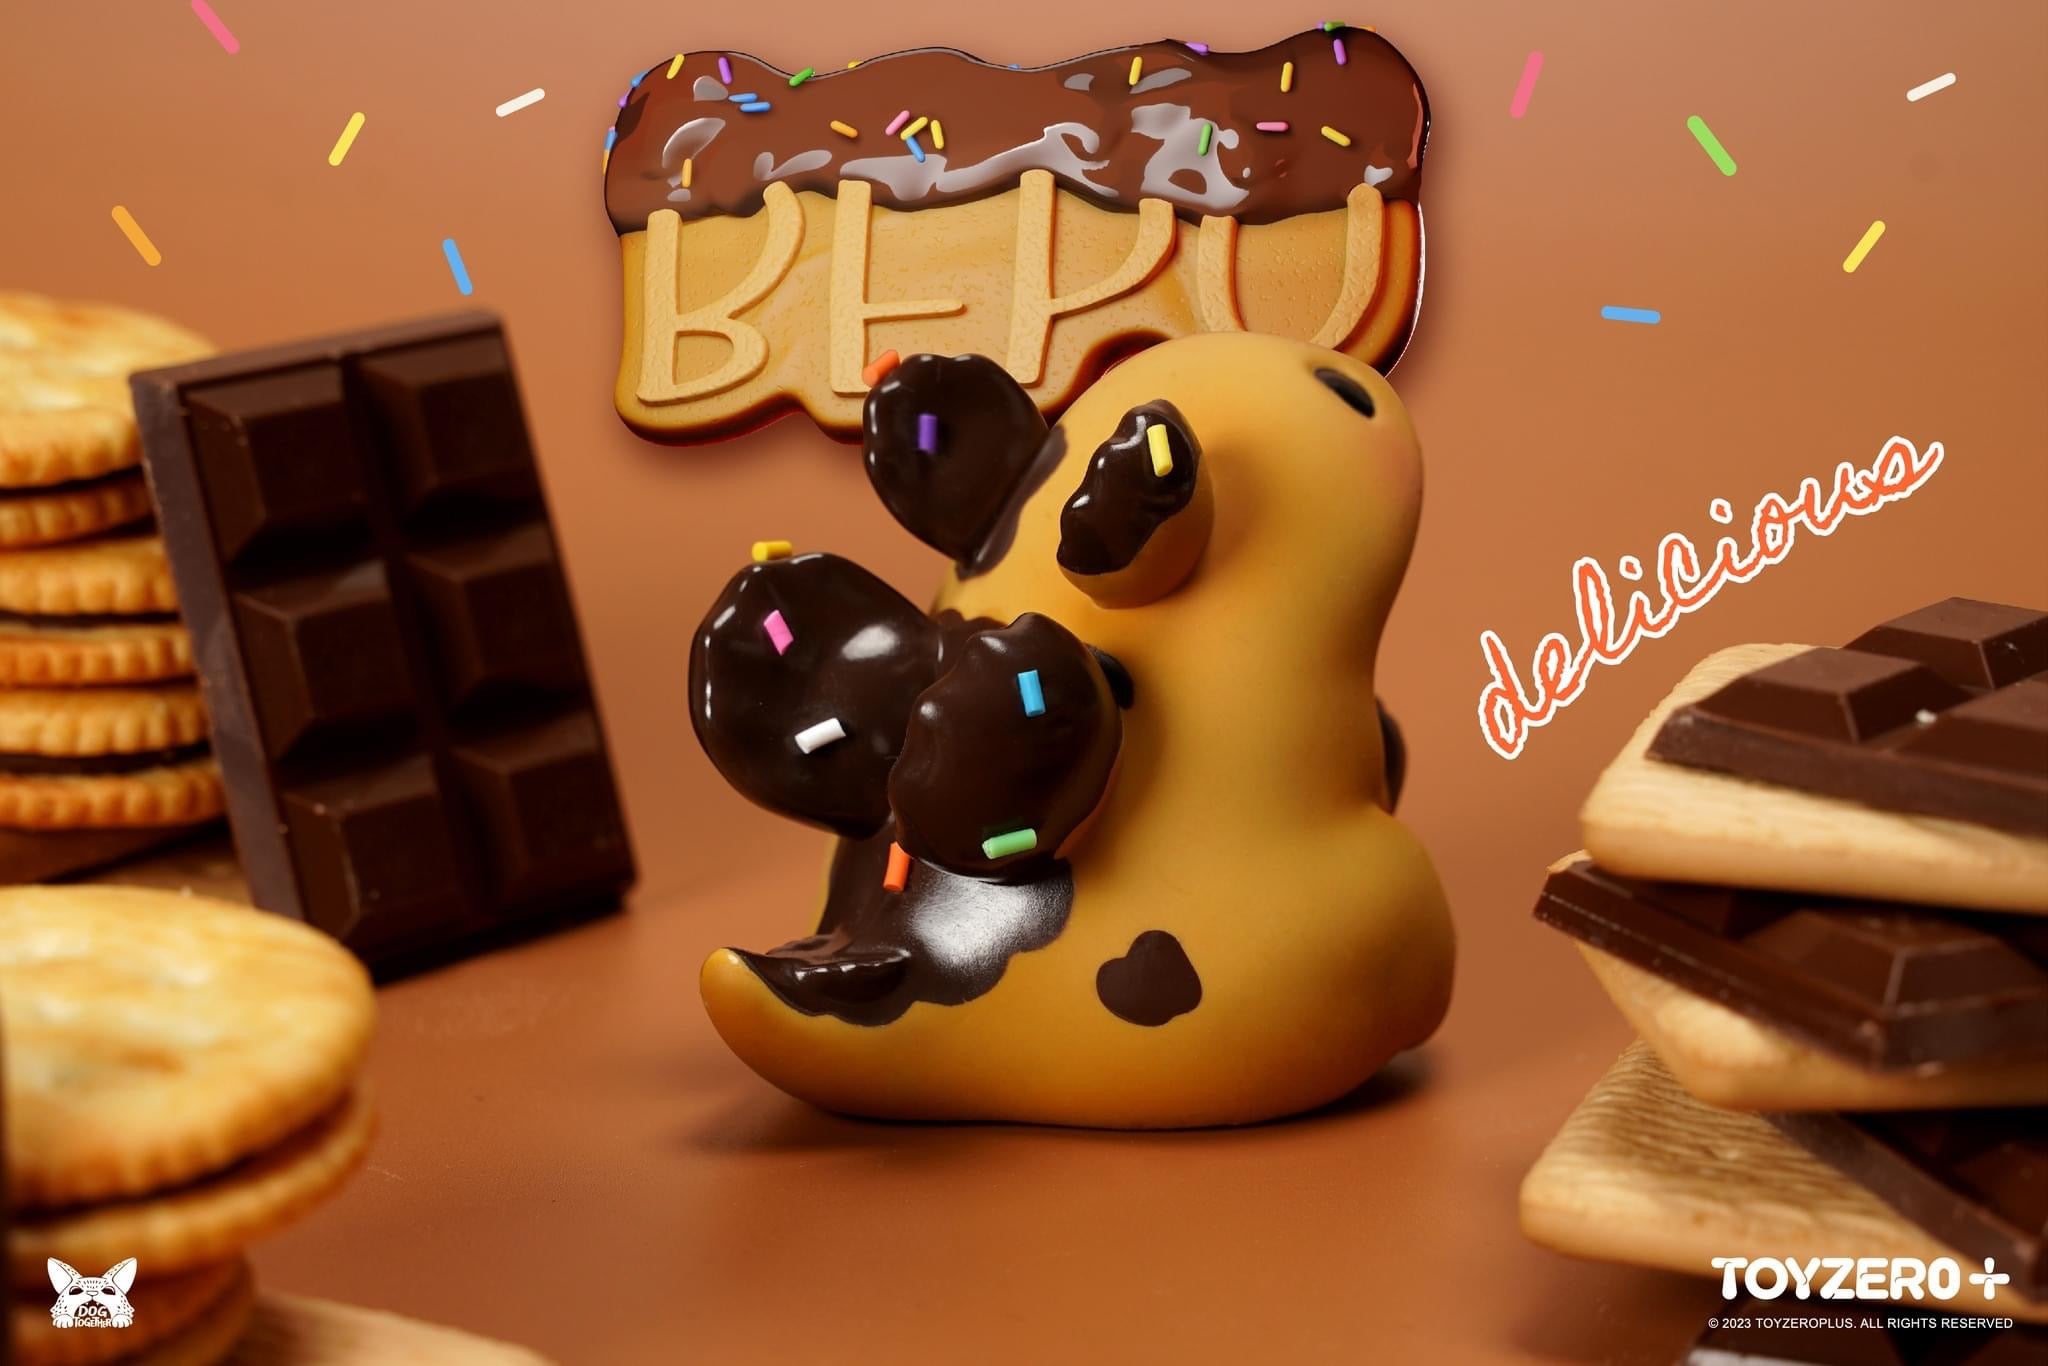 Dog Together - Bear Paw Dragon BEPO (Chocolate) by Dog Together